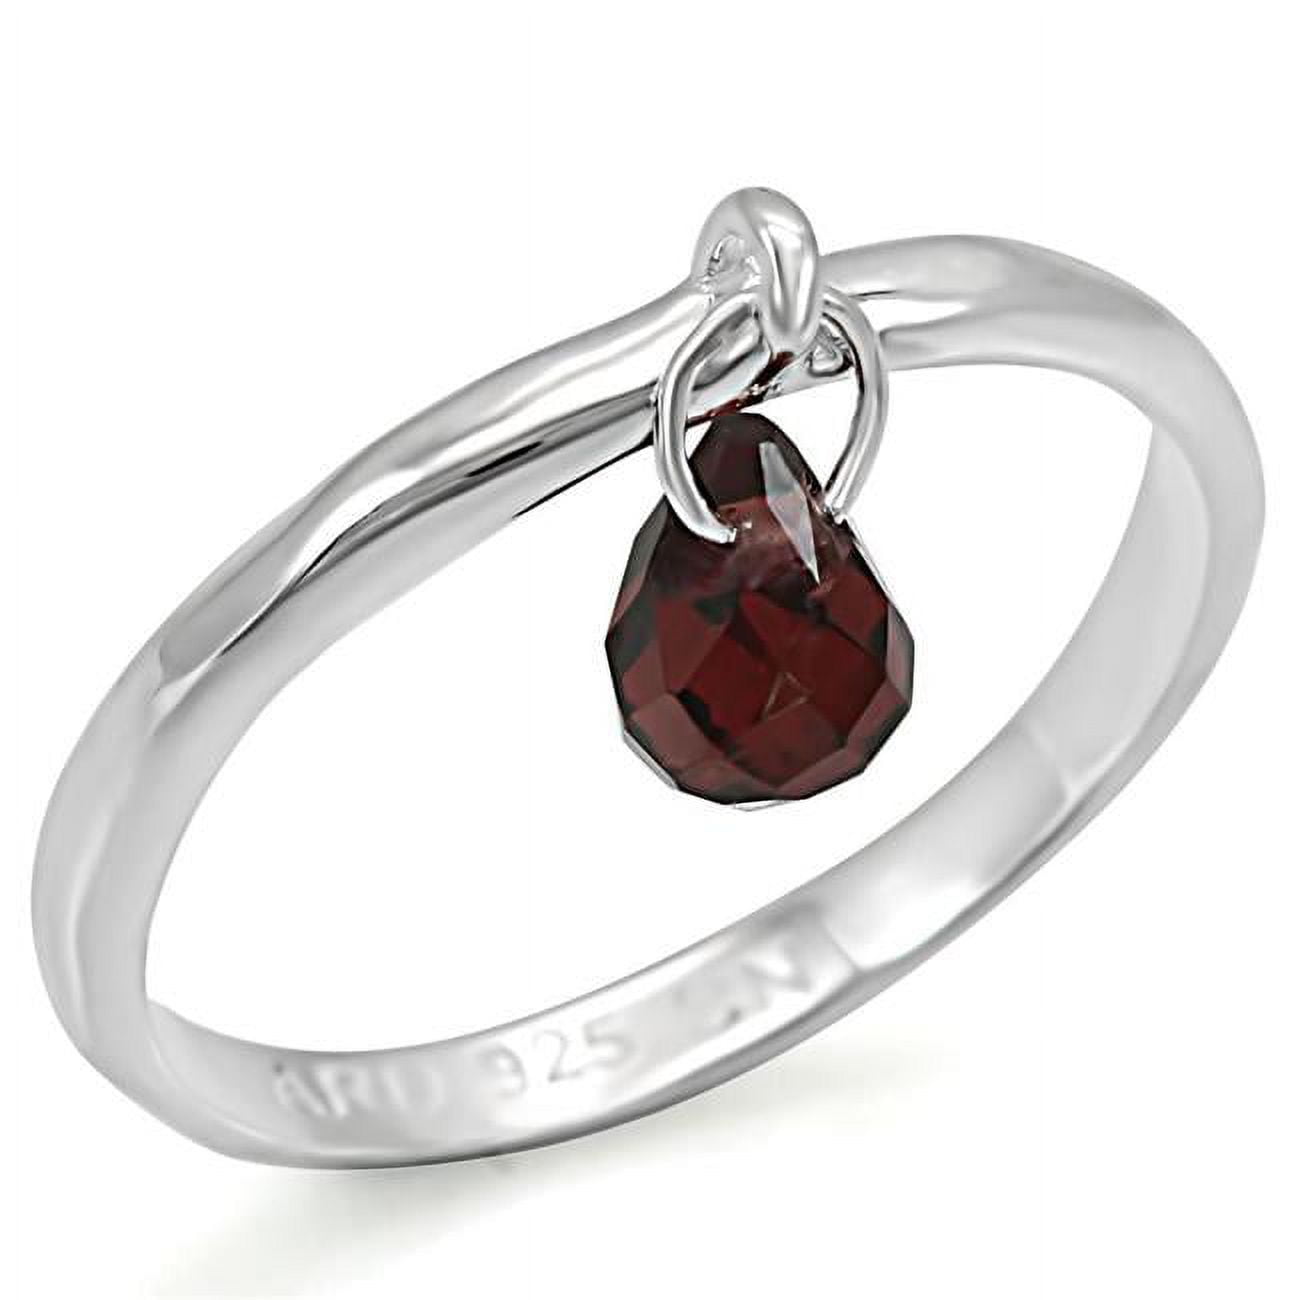 Picture of Alamode LOS320-6 Women Silver 925 Sterling Silver Ring with Genuine Stone in Garnet - Size 6